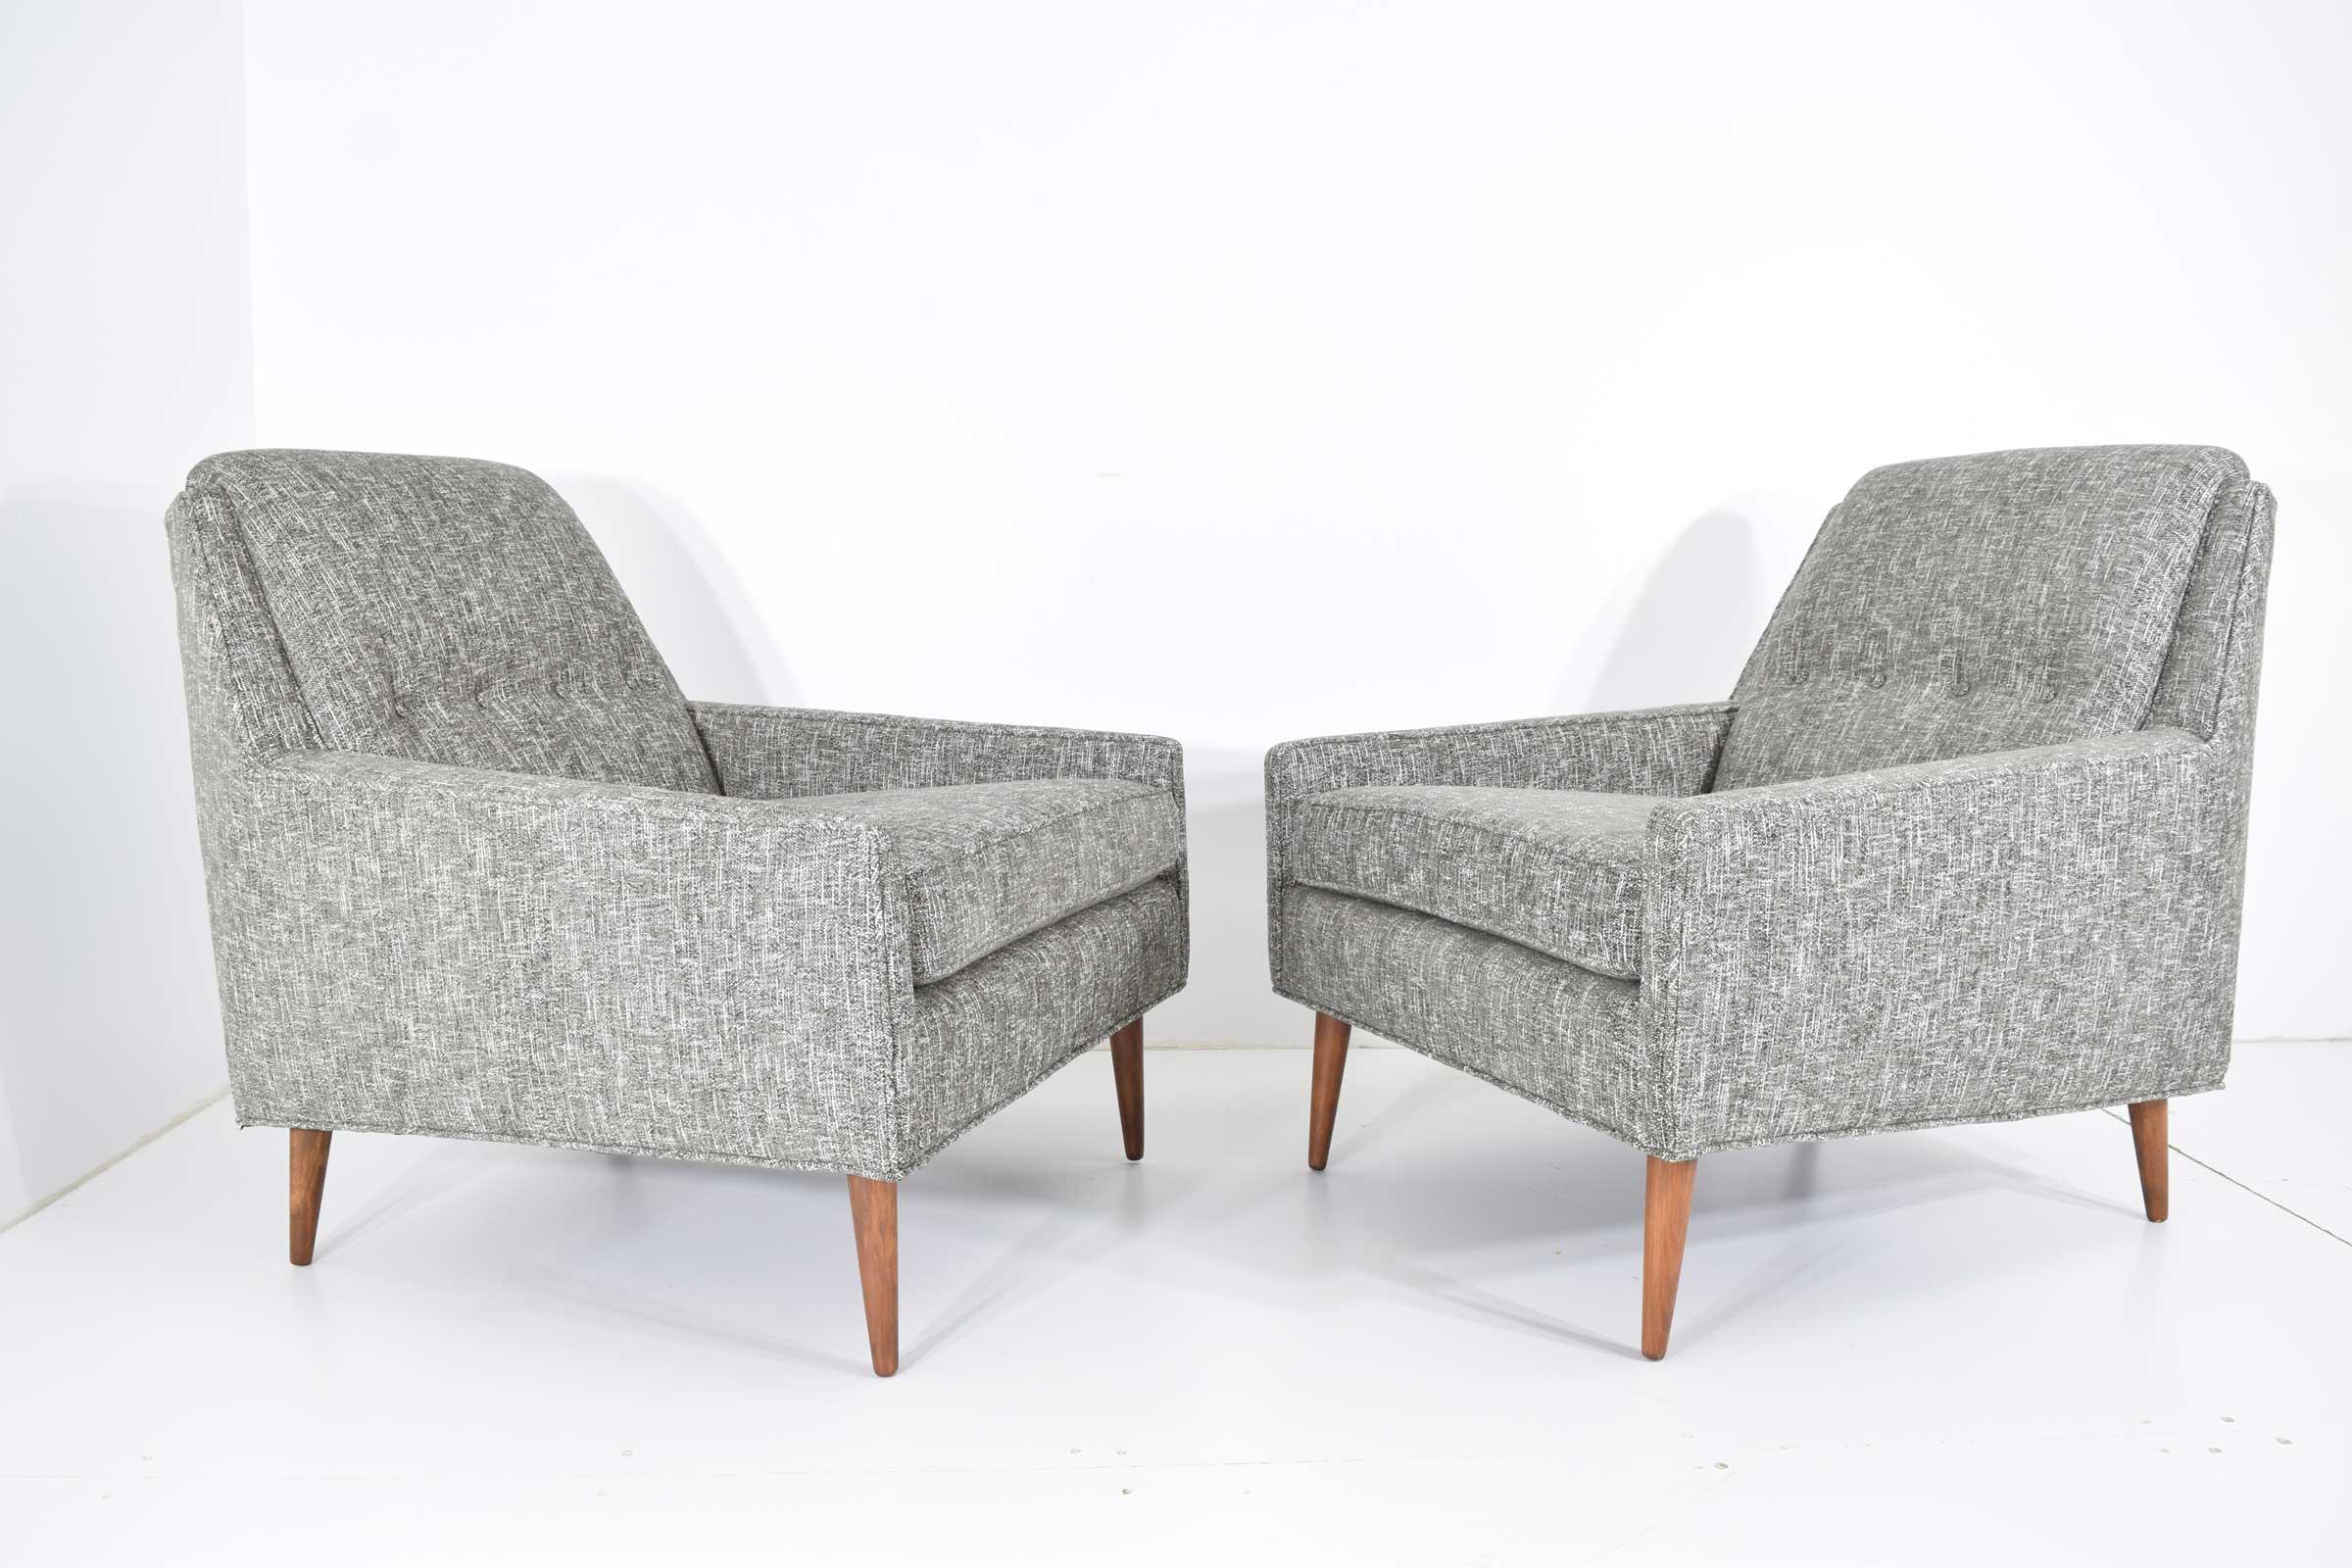 20th Century Mid-Century Modern Style Lounge Chairs in New Upholstery